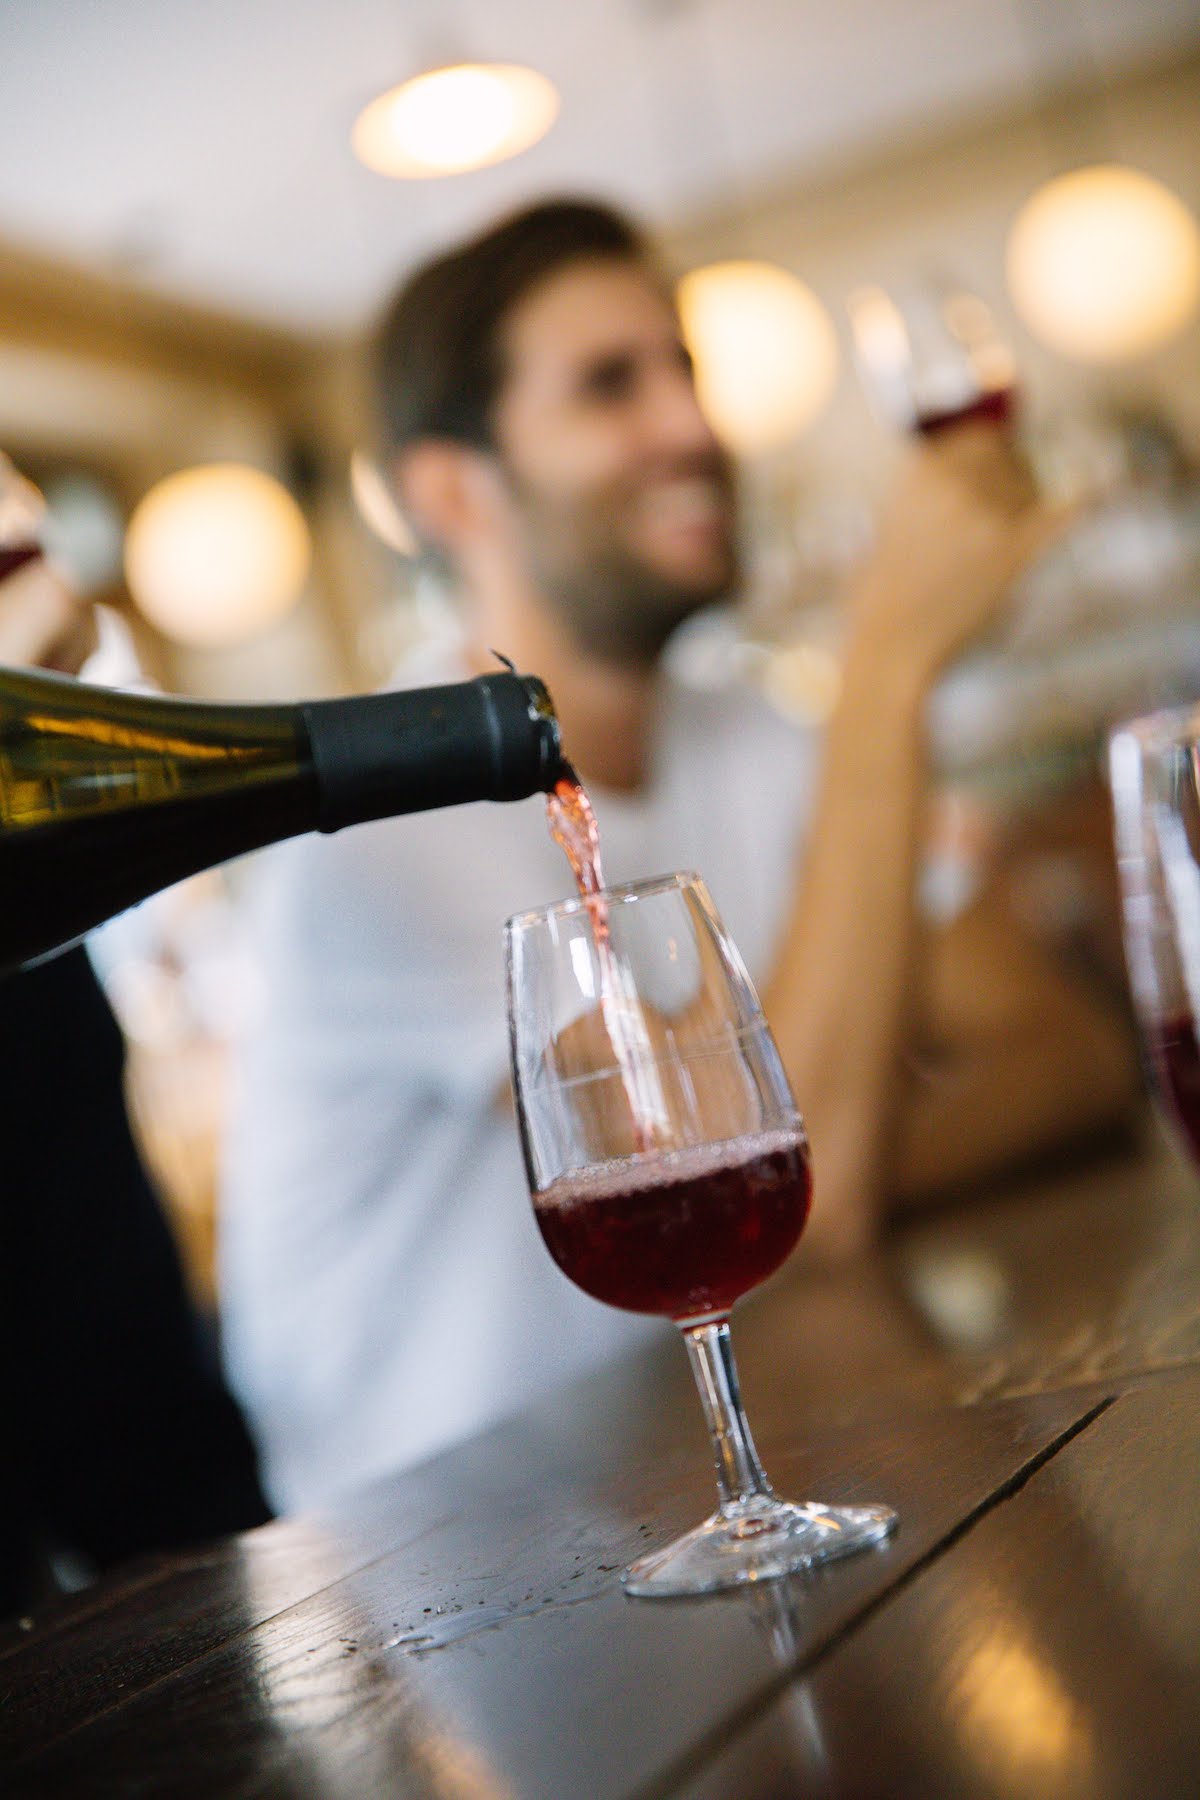 Close up of a small glass of red wine being poured with a smiling man holding another glass of wine in the background